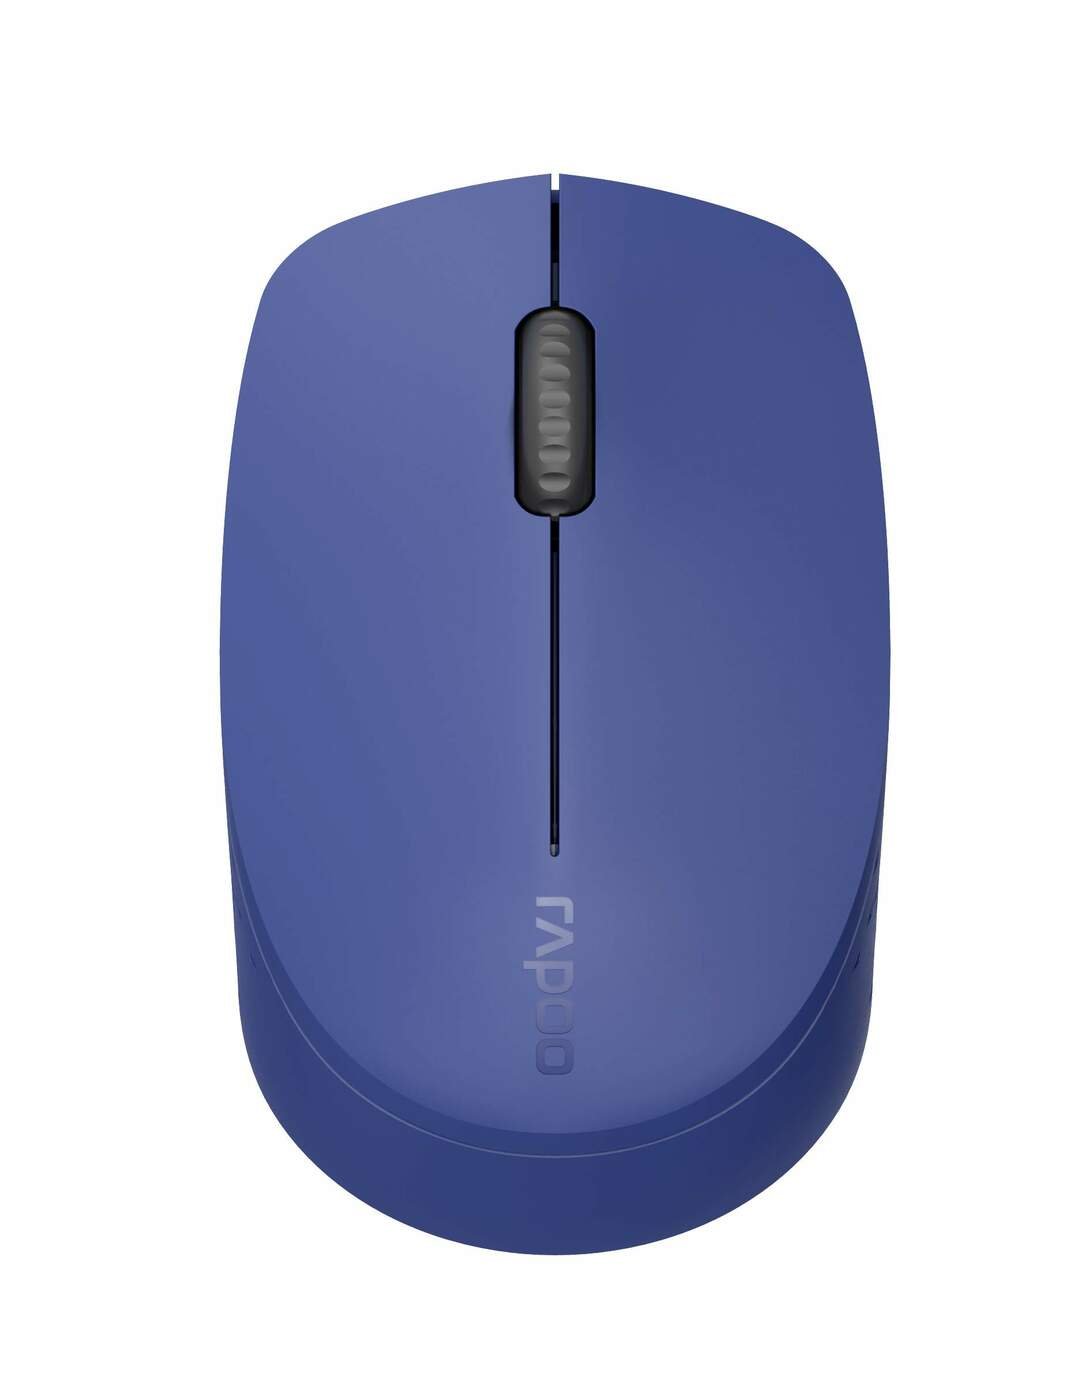 Rapoo M100 Multi Mode Wireless Mouse Review